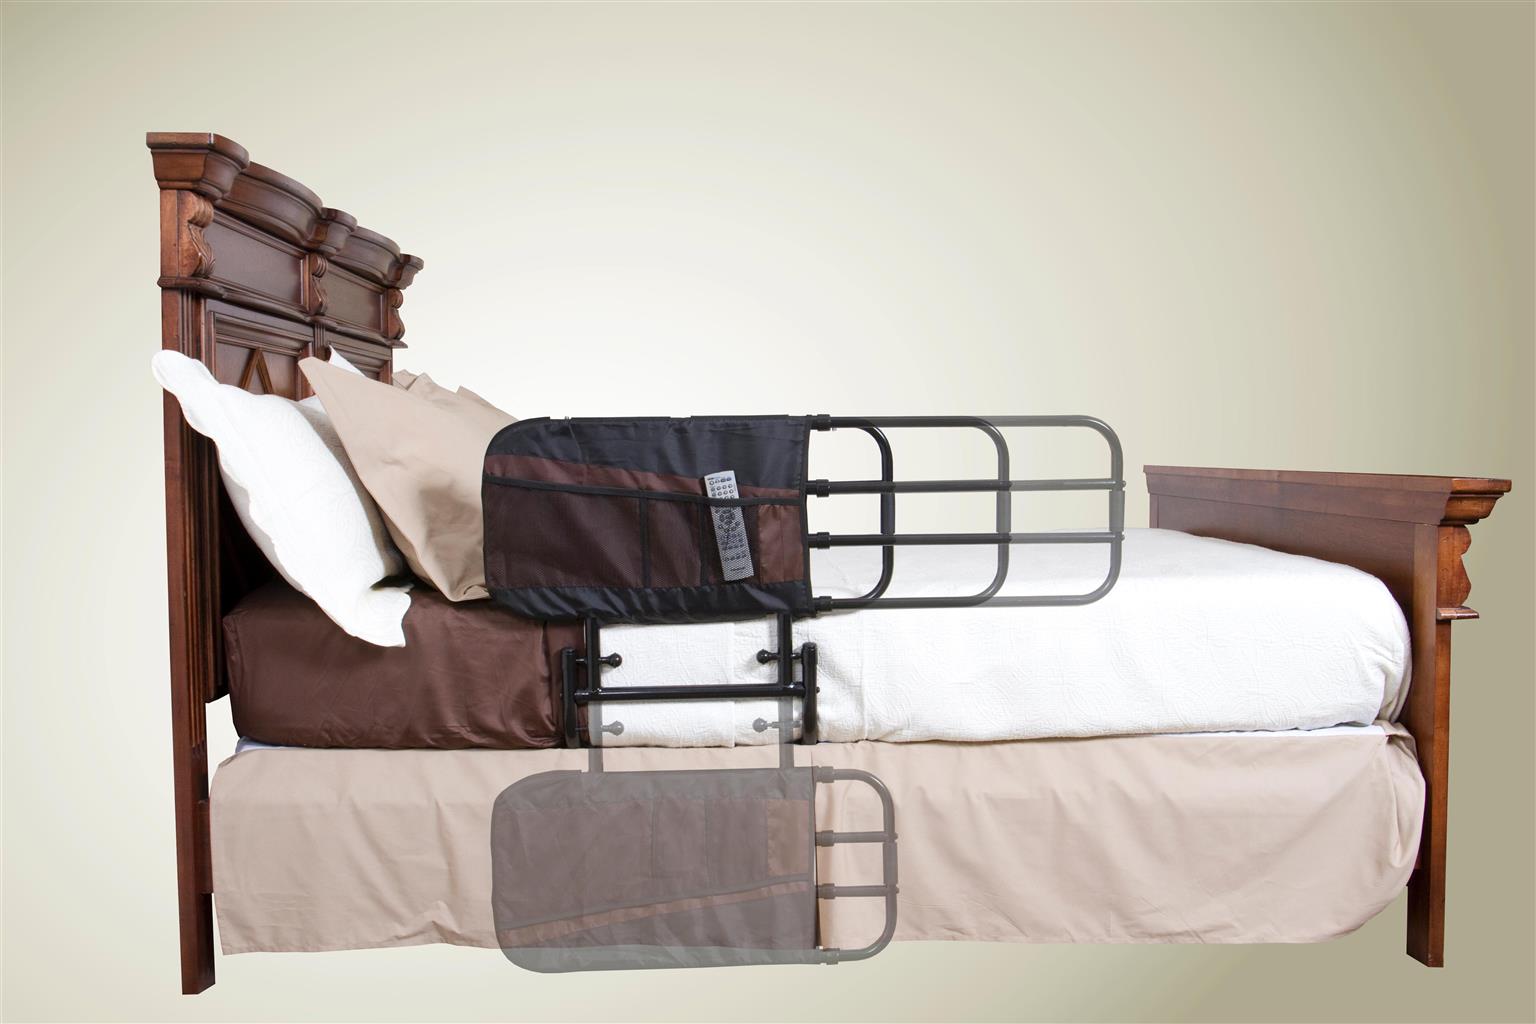 EZ Adjustable Bed Rail or Cot Side - Fits Almost All Standard Beds. FREE DELIVERY, while stocks last